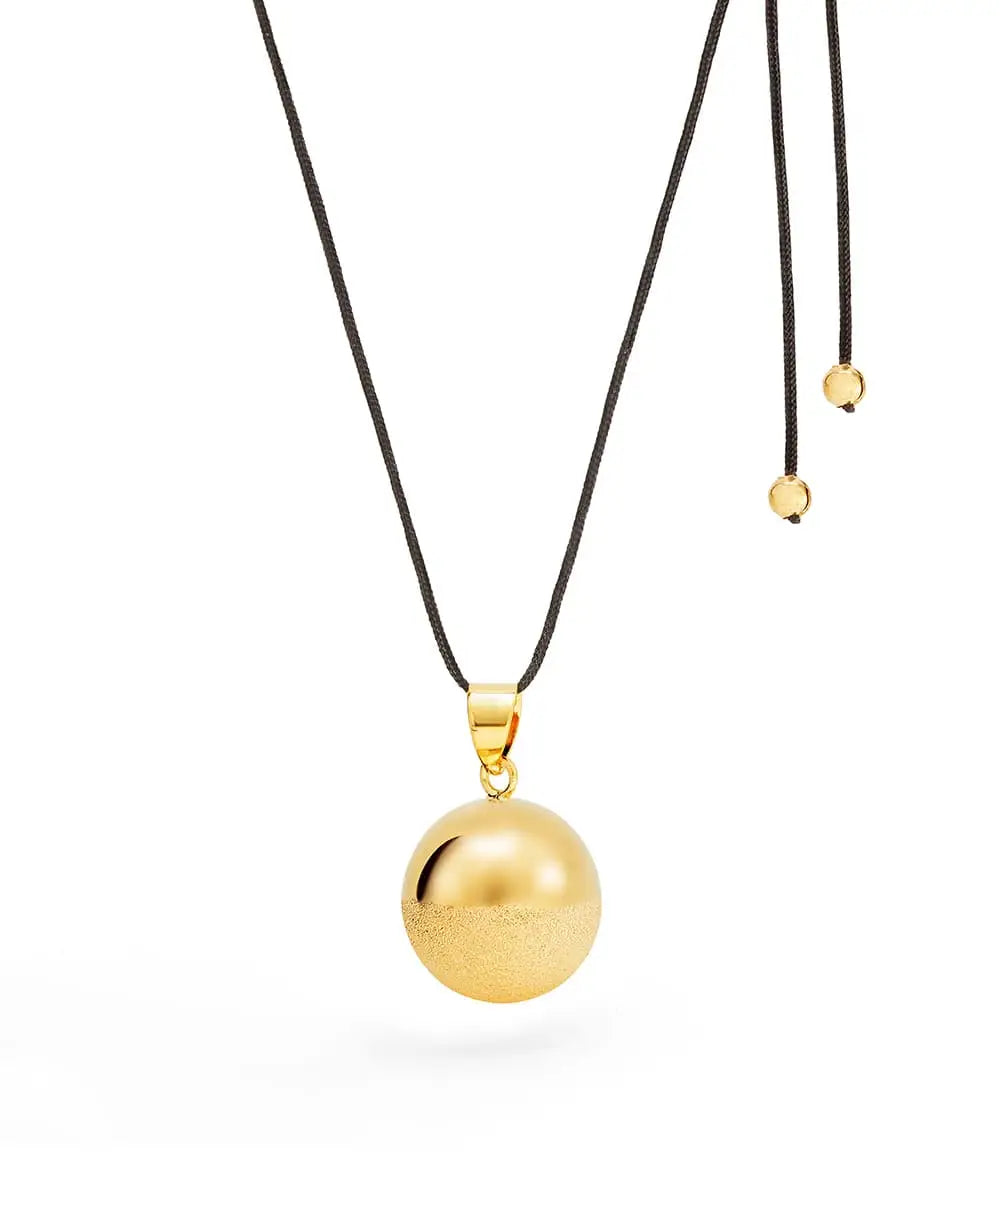 Mom-to-be necklace - Sphère - Gold plated - diamond cut